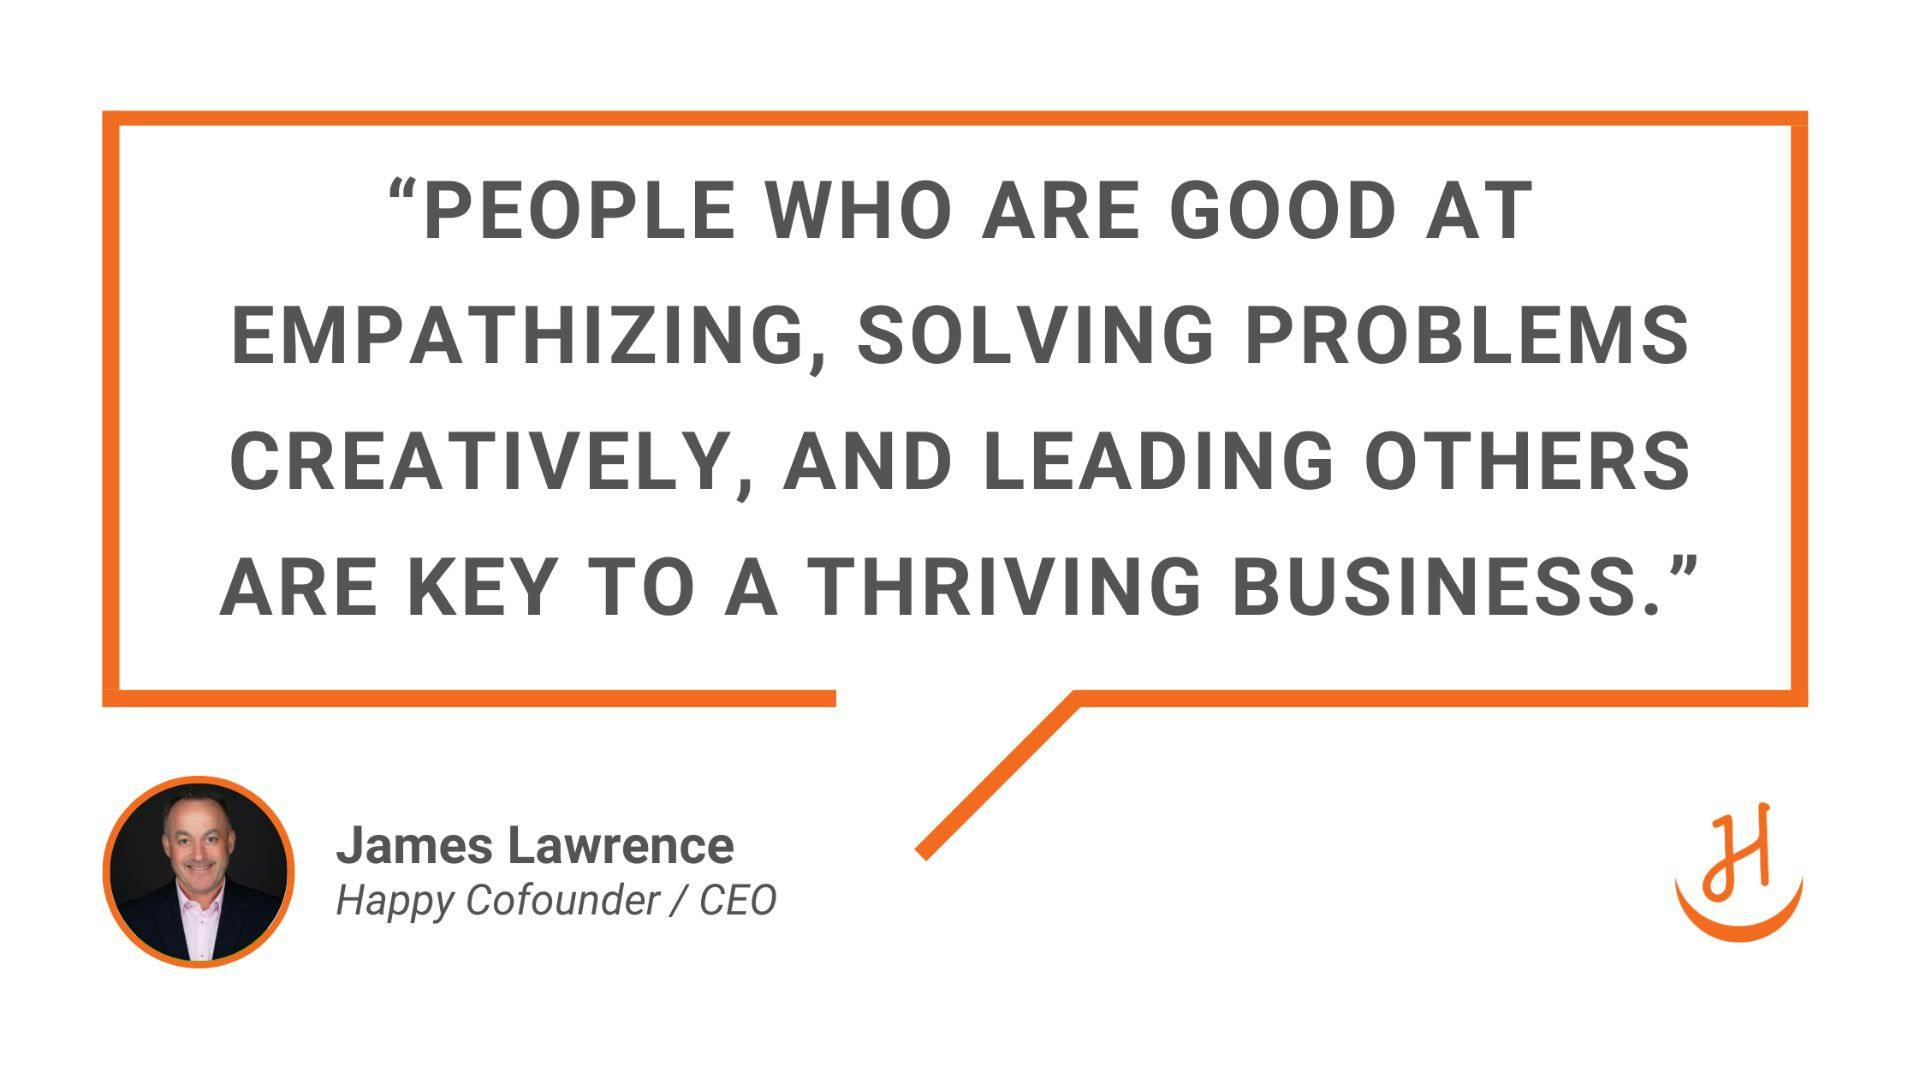 “People who are good at empathizing, solving problems creatively, and leading others are key to a thriving business.” Quote by James Lawrence, Happy Cofounder and CEO